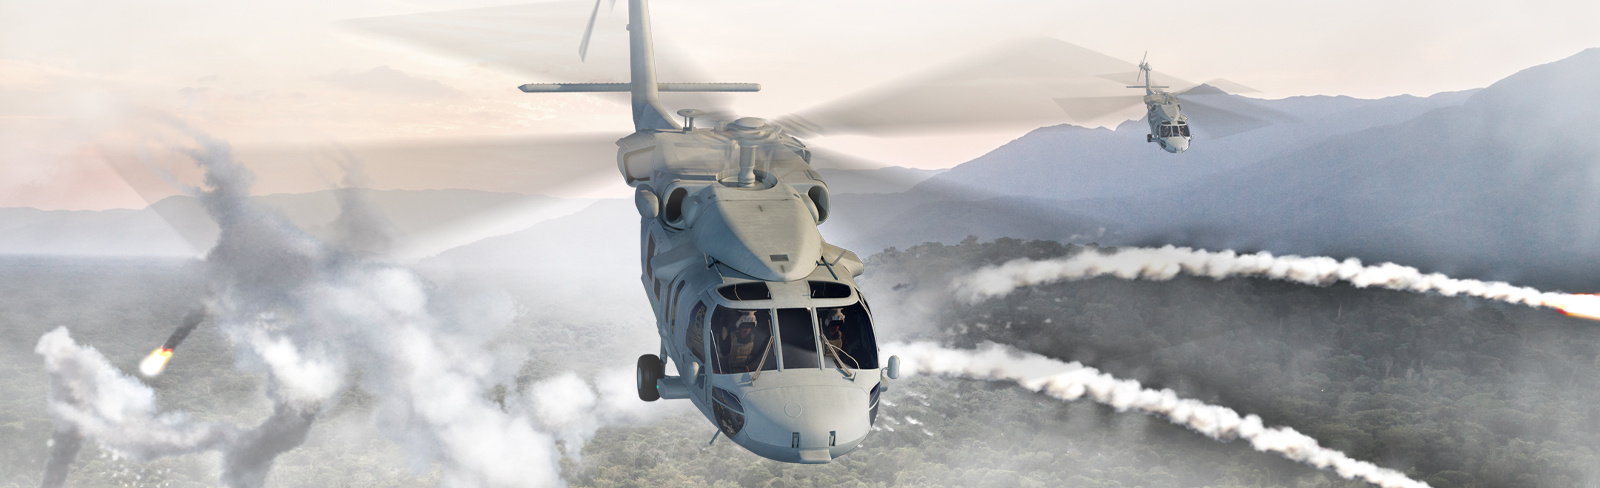 Rotary wing MH-60S Seahawk in flight with mountain range in distance and countermeasures being dispensed from platform.  